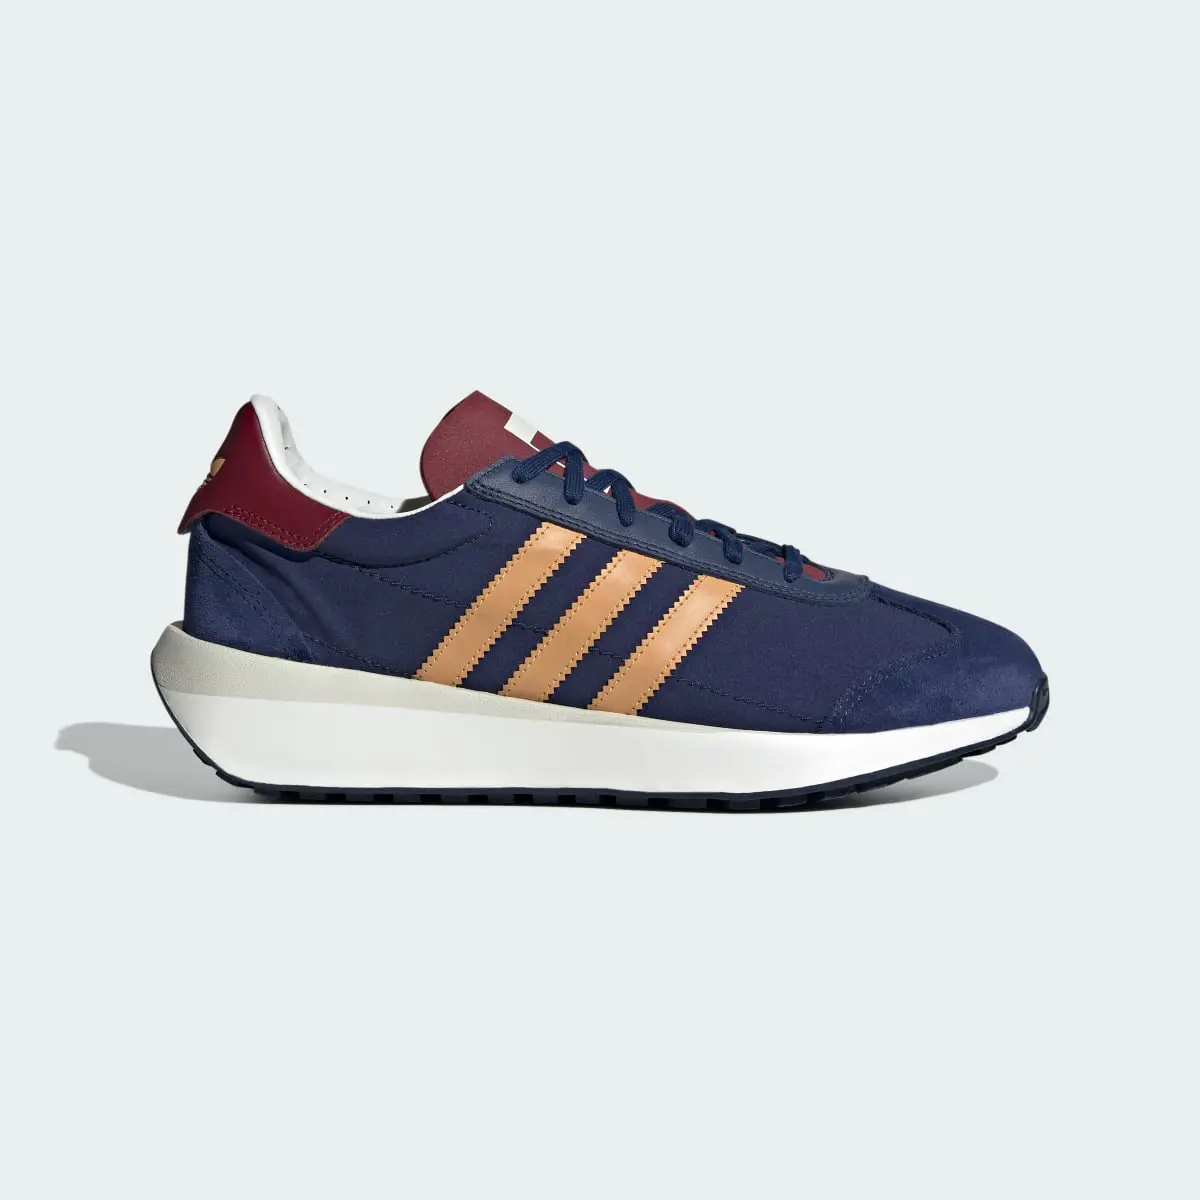 Adidas COUNTRY XLG. 2